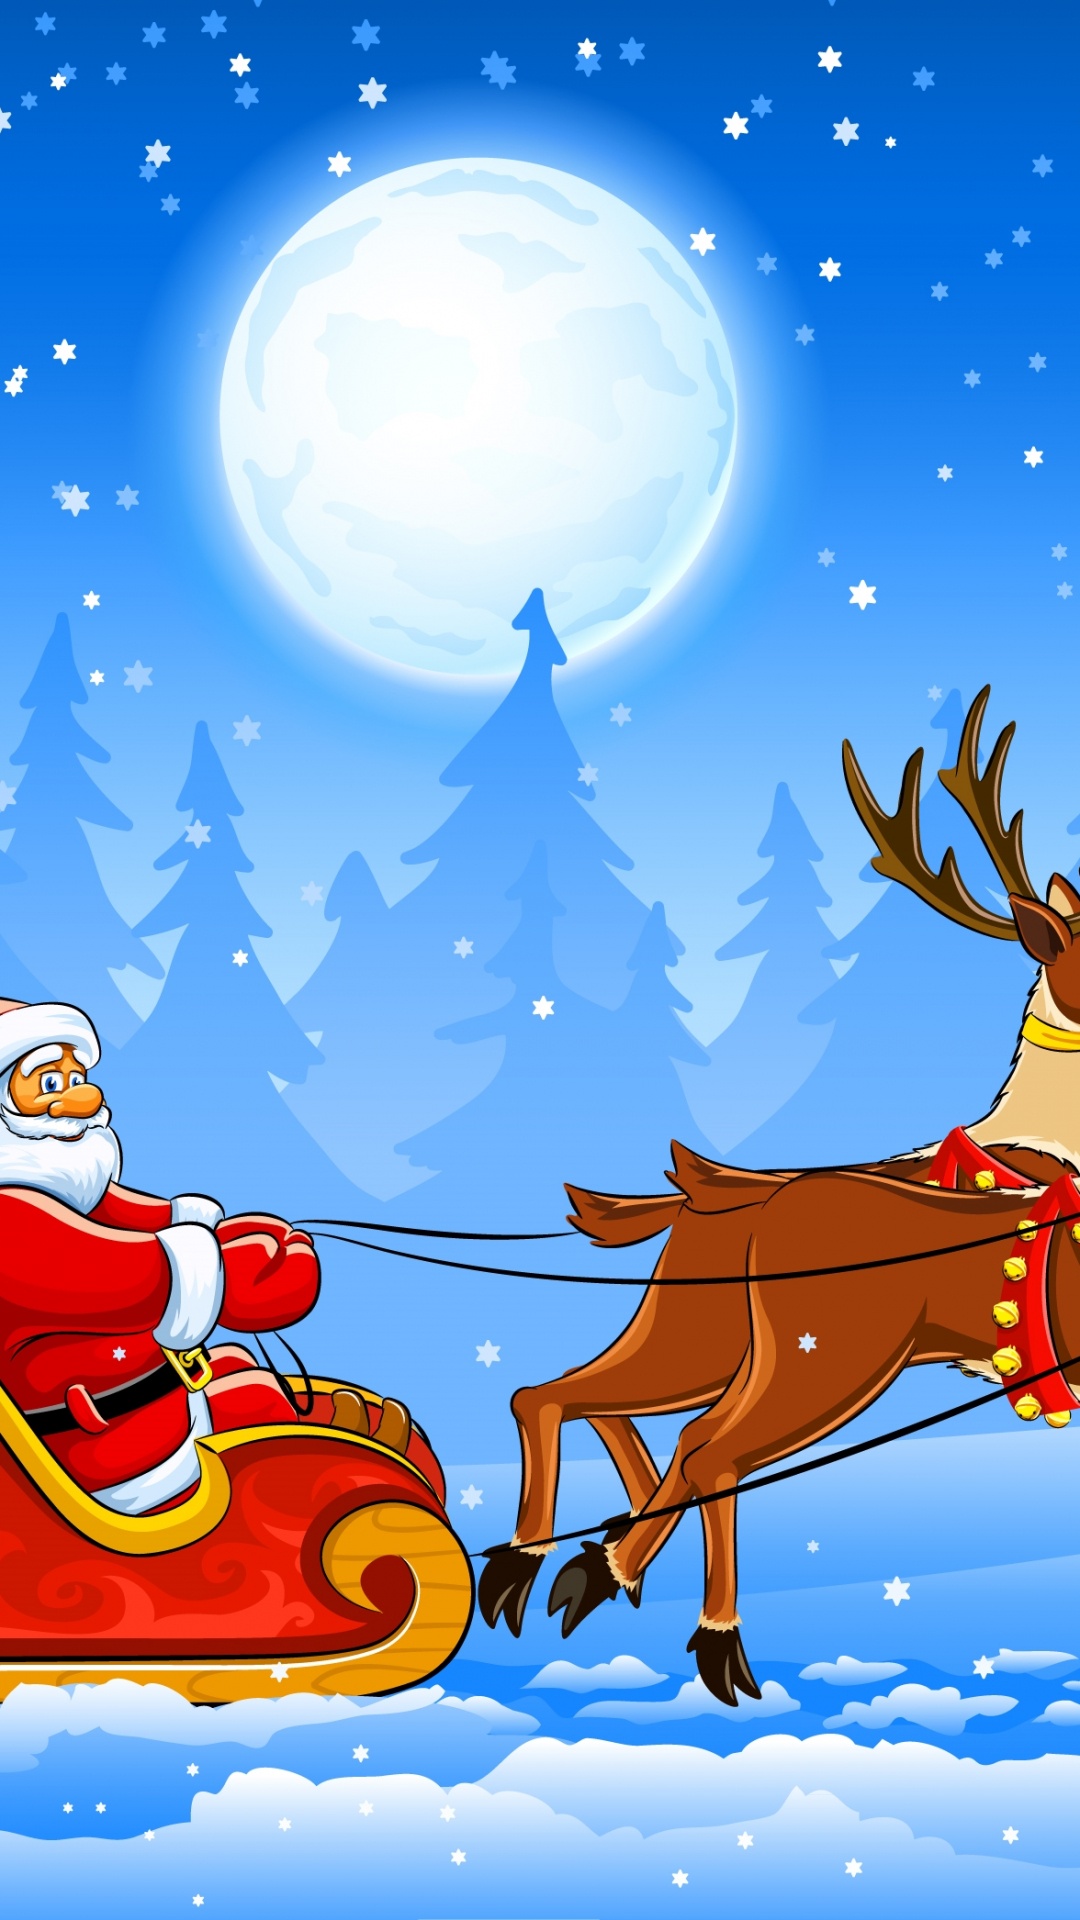 Reindeer, Santa Claus, Sled, Christmas Day, Vector Graphics. Wallpaper in 1080x1920 Resolution